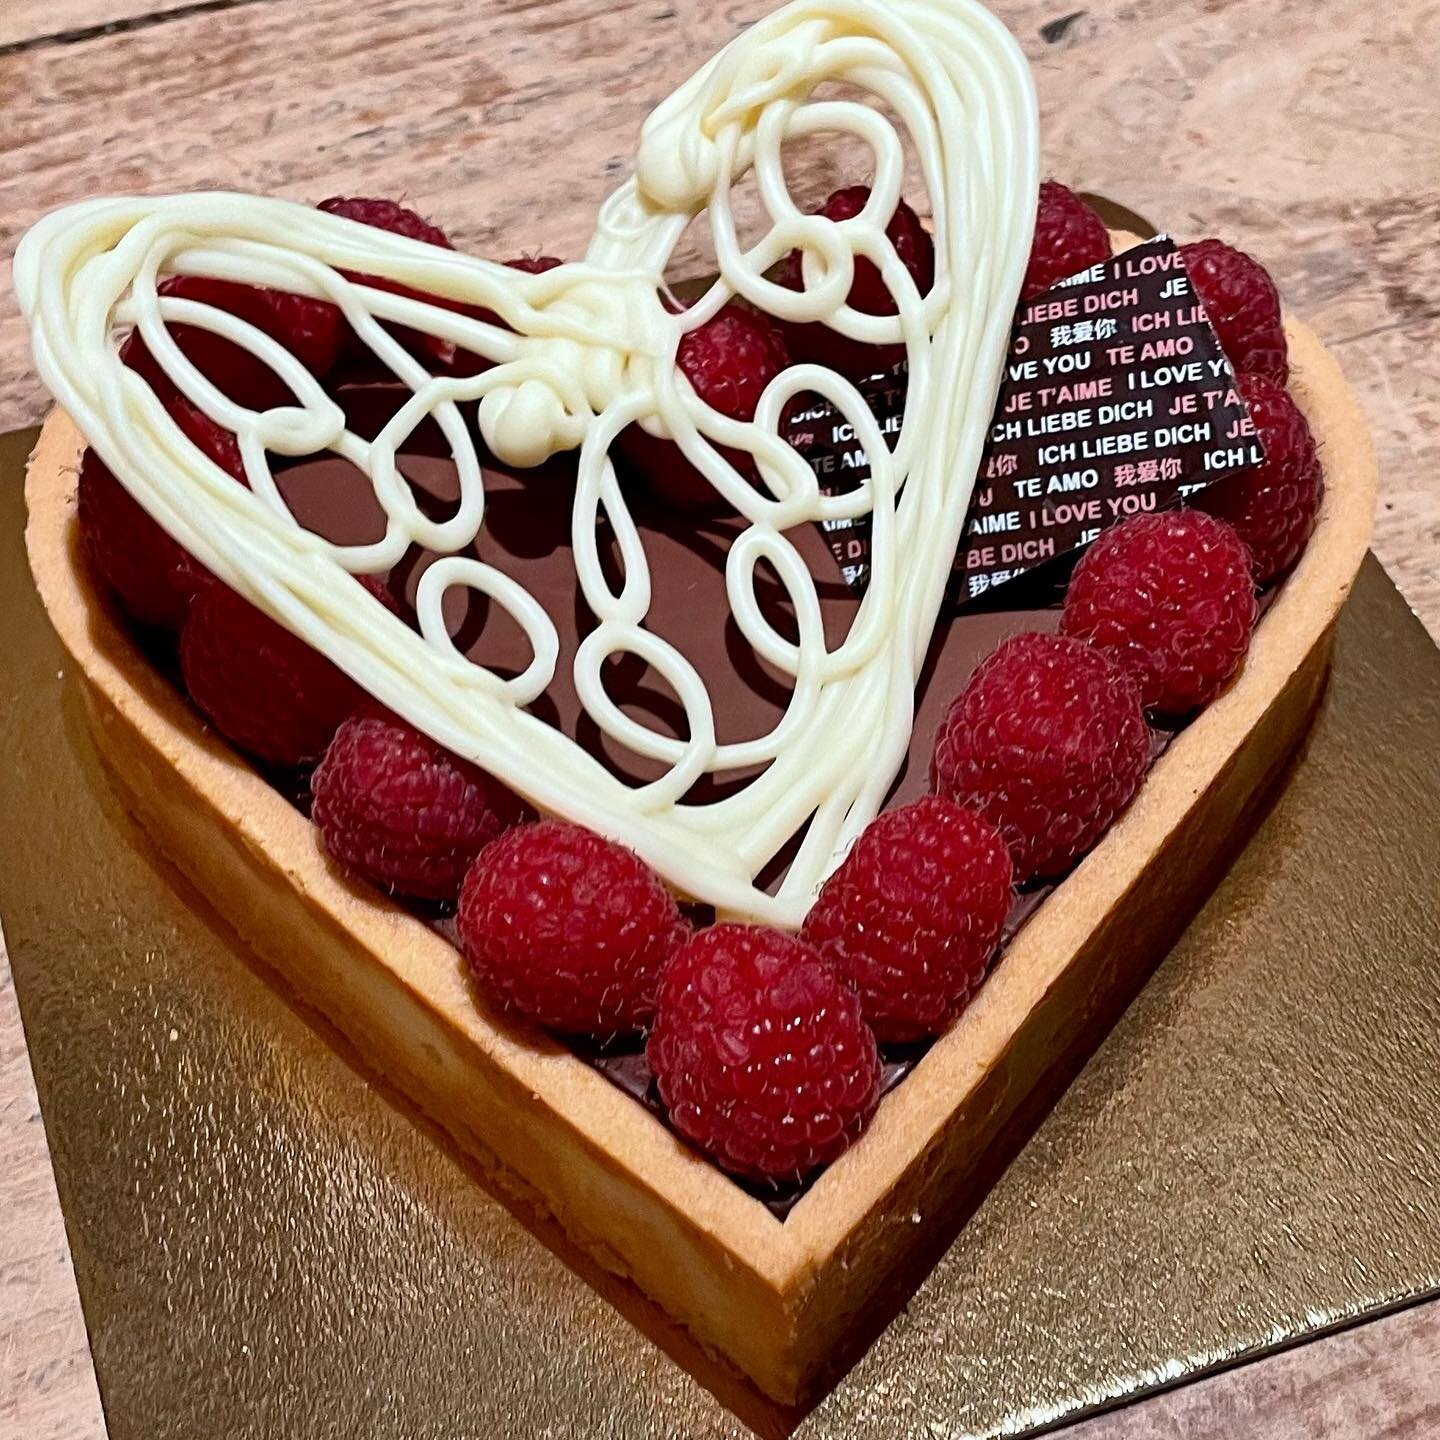 The Valentine&rsquo;s tart has a thin layer of homemade raspberry puree, covered with an extra-bitter chocolate ganache, in a sweet dough shell. This heart is topped with fresh raspberries and chocolate decor. 
We will also have decadent raspberry-ch